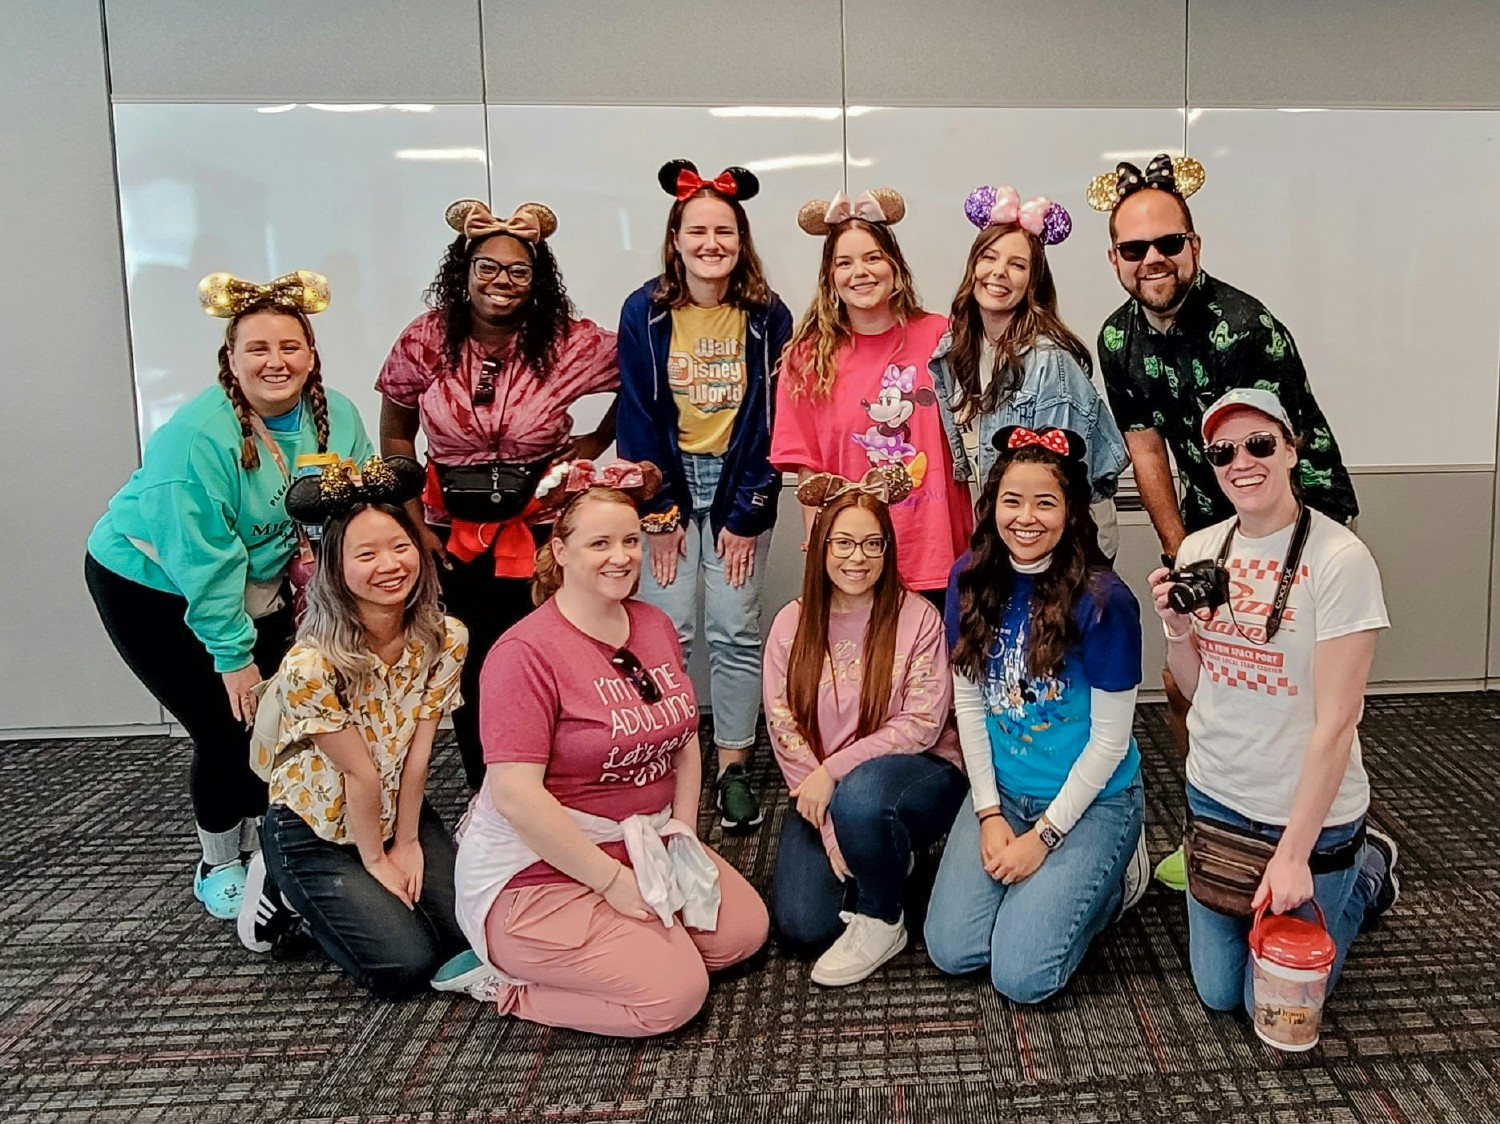 Employees celebrate their fun (and some might say magical) team theme at Florida's Kickoff event. 